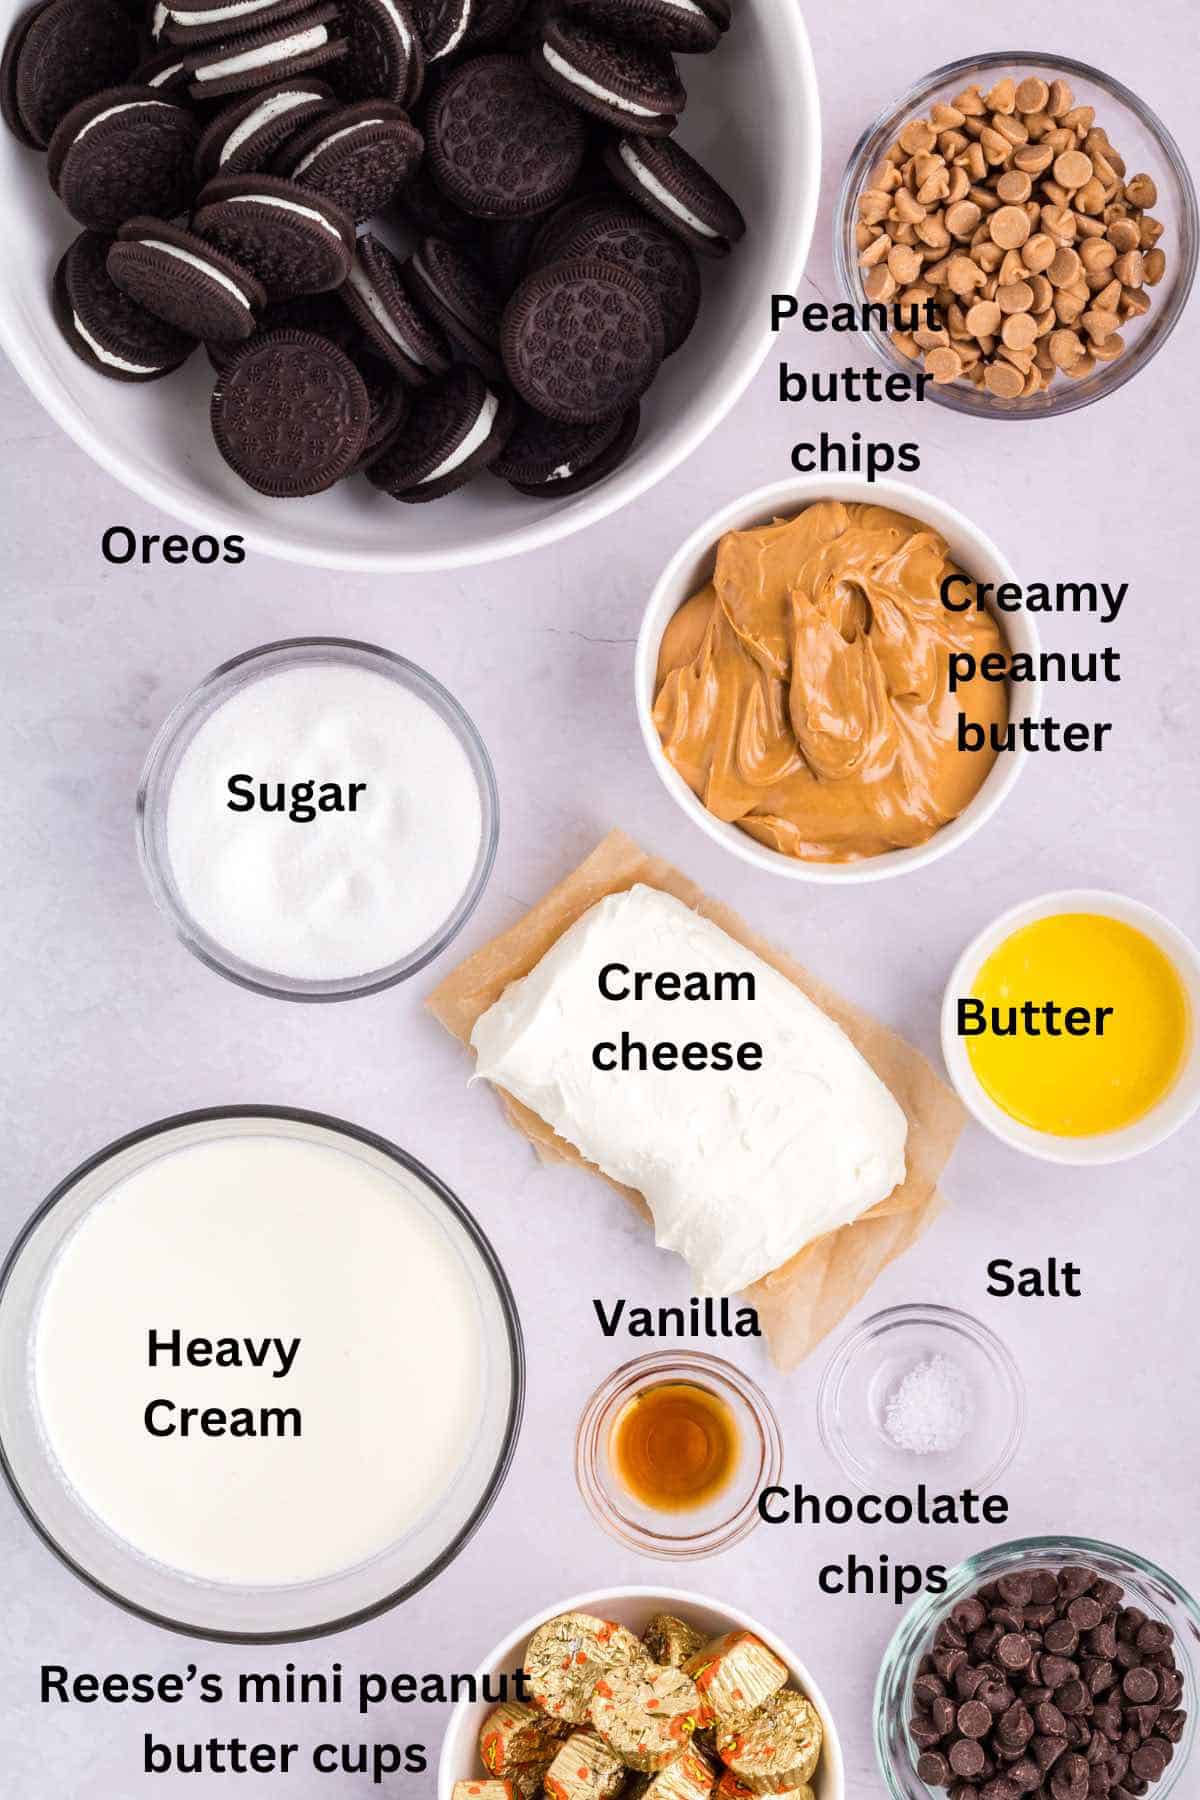 Ingredients for a peanut butter pie include Oreos, peanut butter, and chocolate chips. 